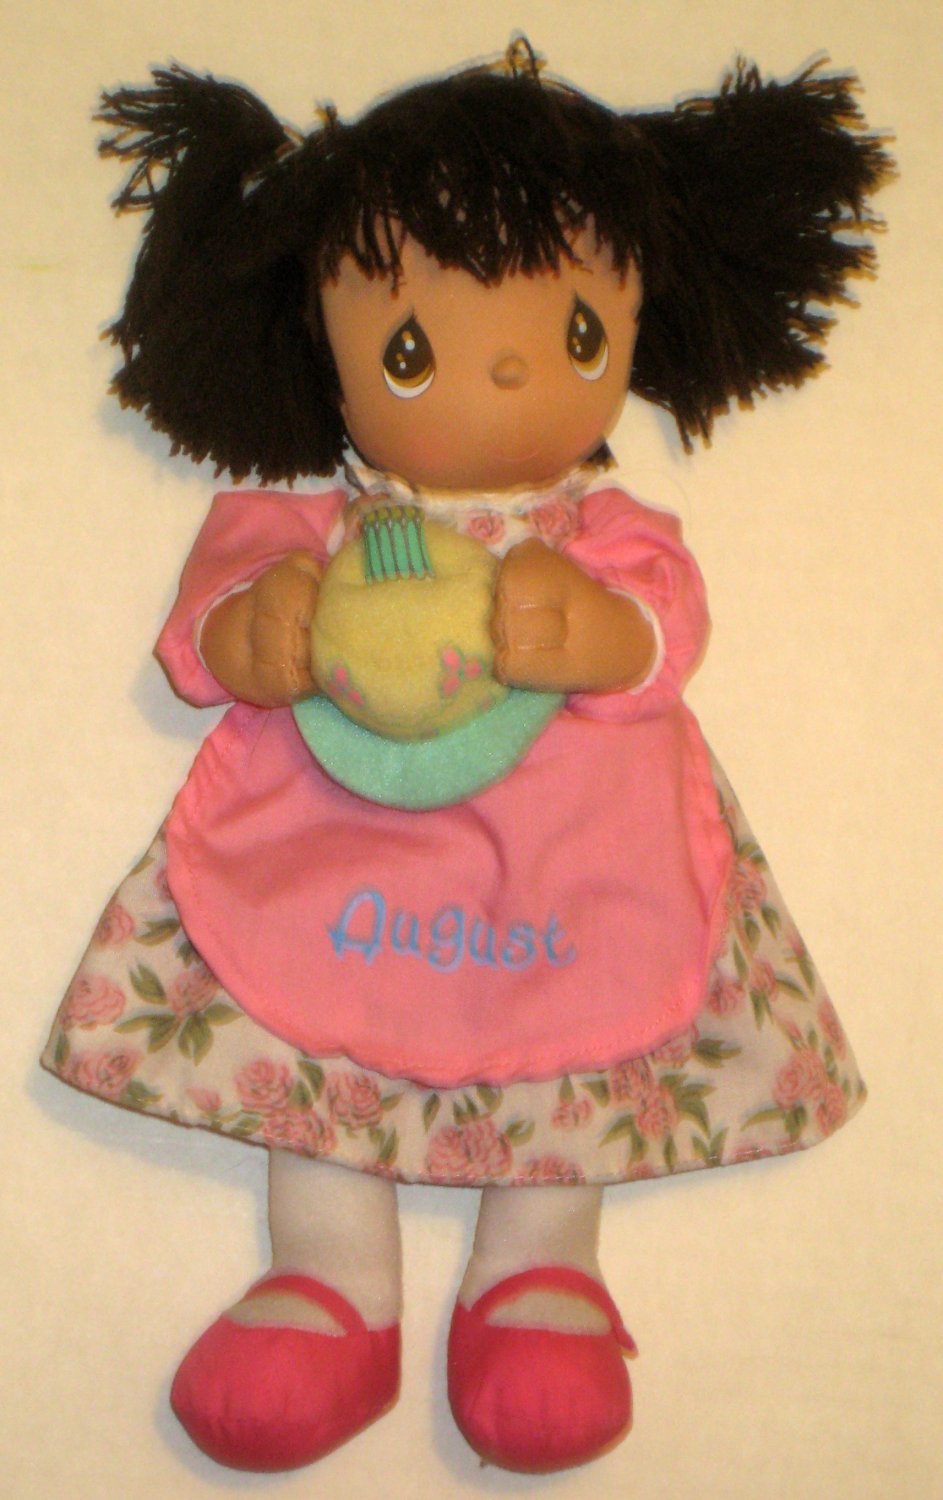 Precious Moments August 12 Inch Plush Doll Birthday Cake Roses Dress Outfit 2005